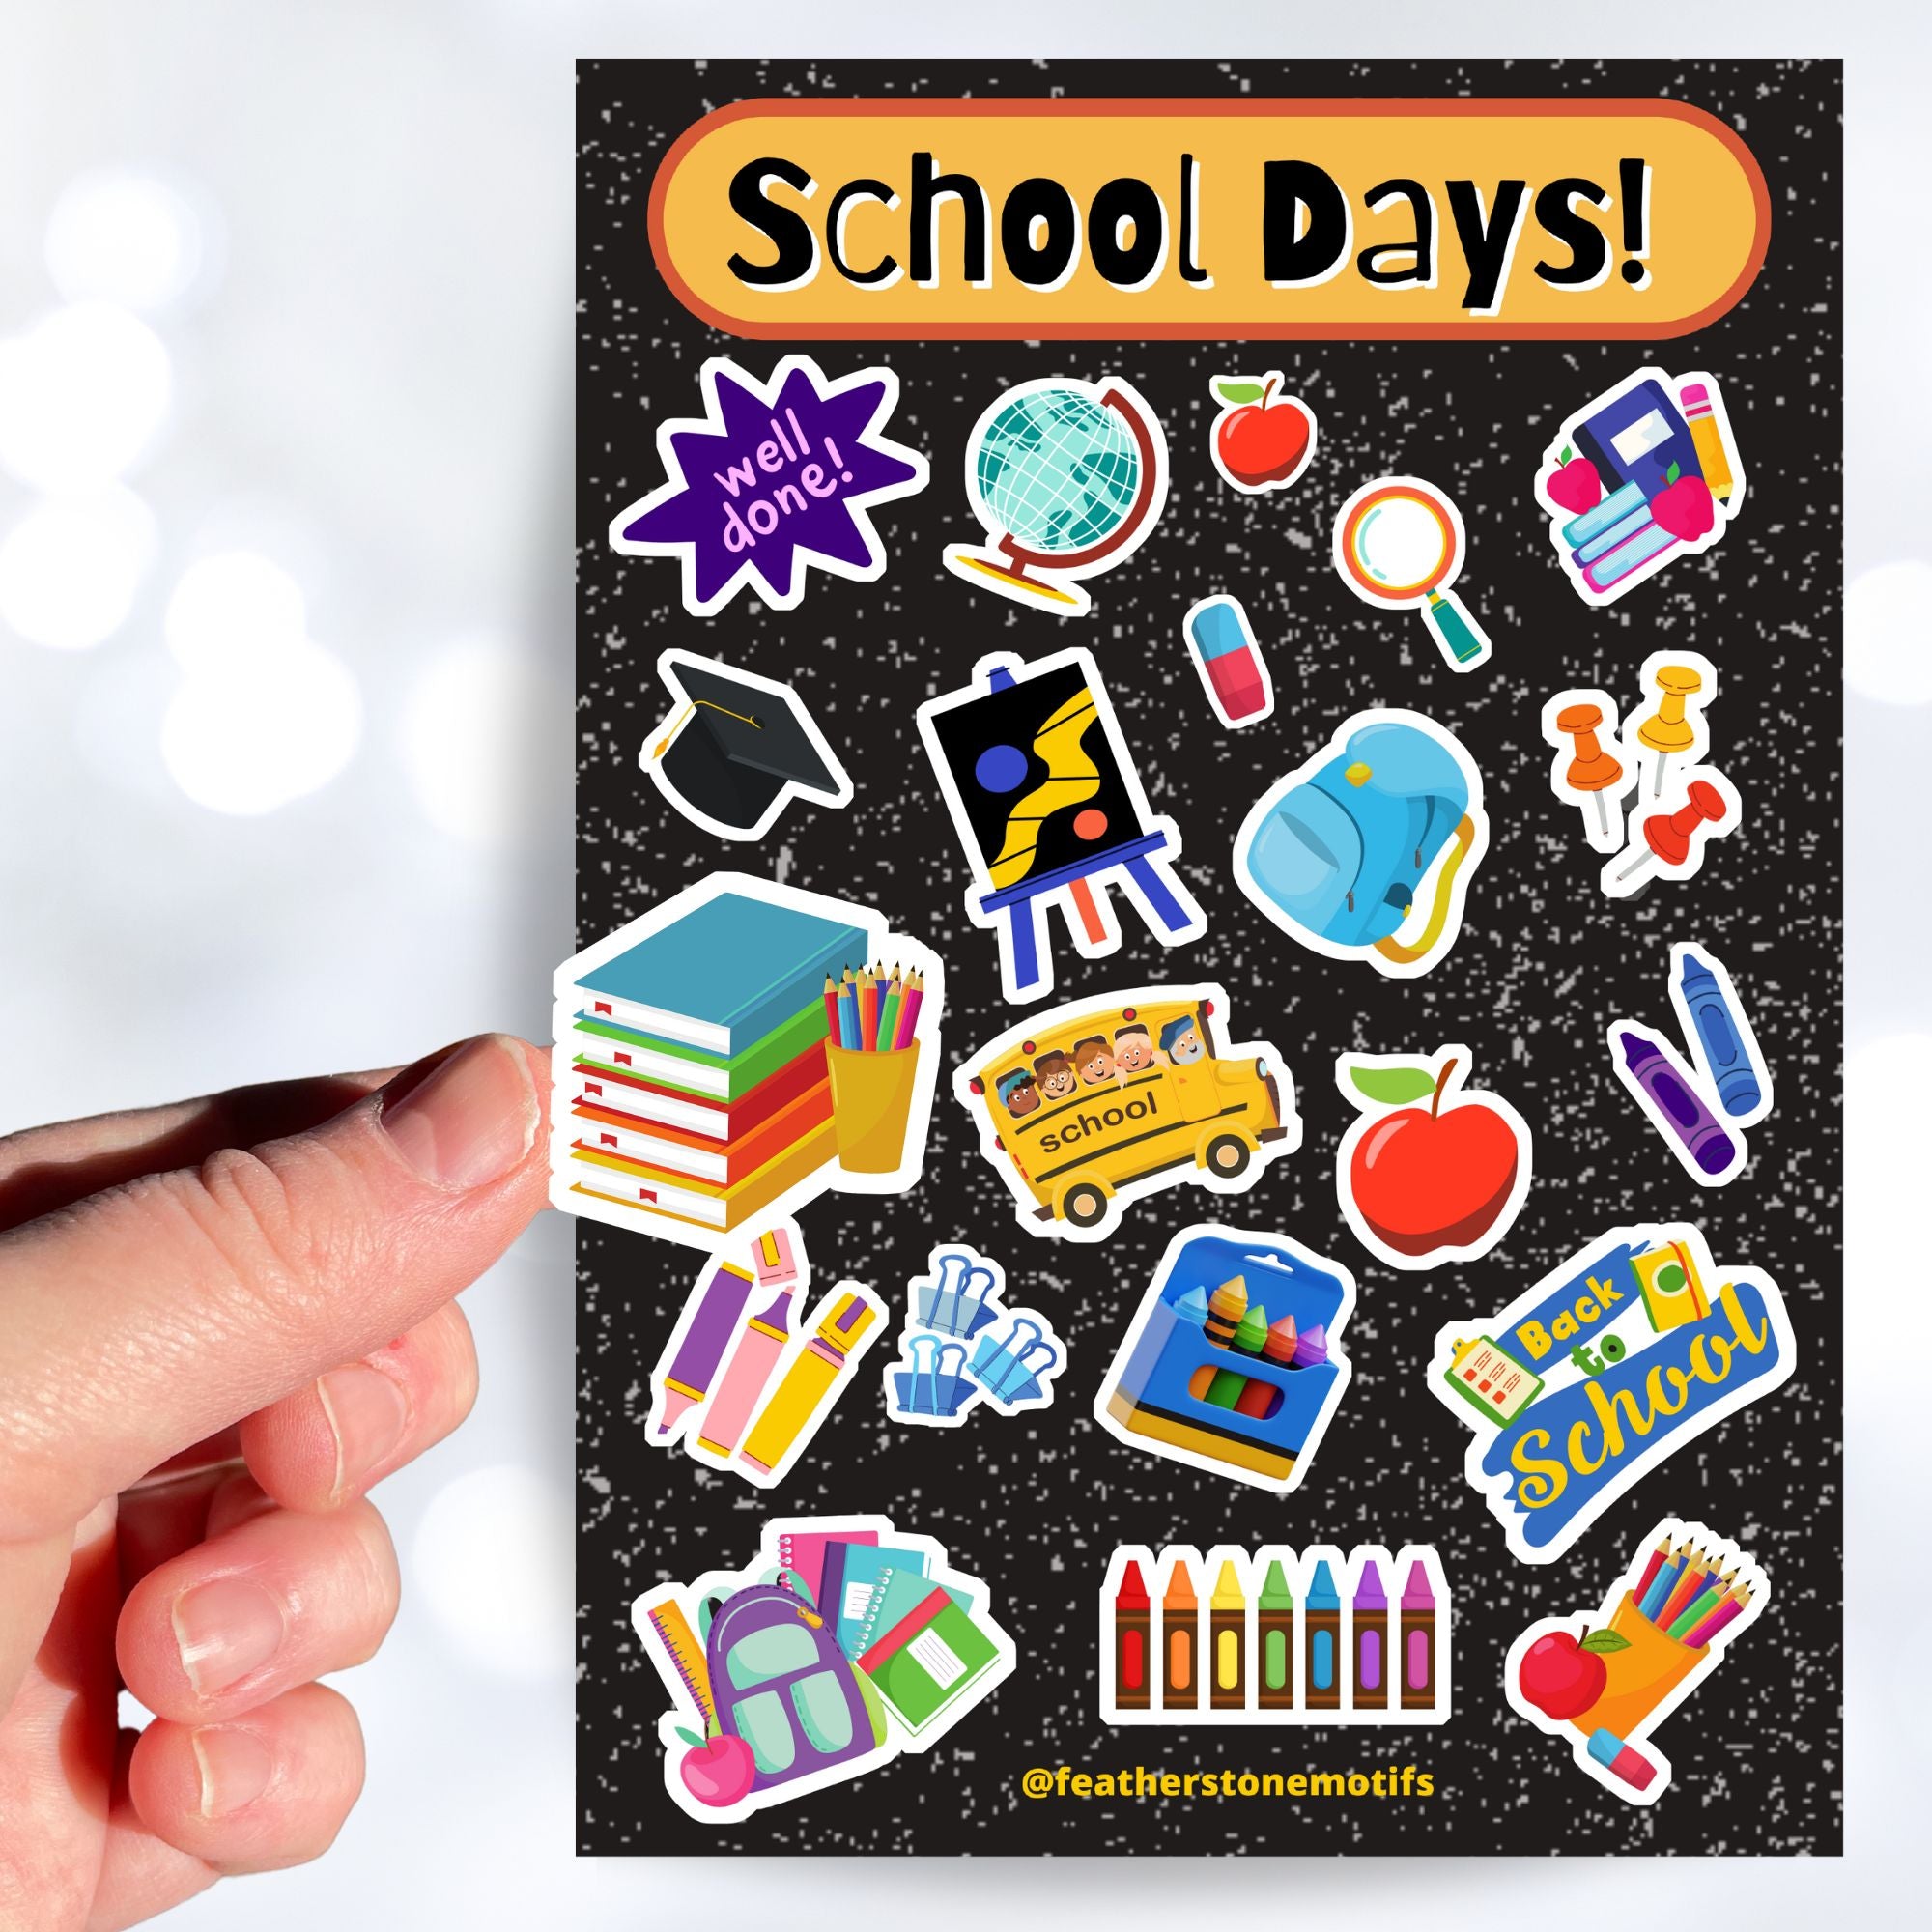 Reading, writing, and arithmetic; this sticker sheet is perfect for students, or educators, of all ages! It's filled with stickers showing all aspects of school - books, globe, crayons, backpacks, and of course a mortarboard / graduation cap! This image shows a hand holding a sticker of books and pencils above the sticker sheet.